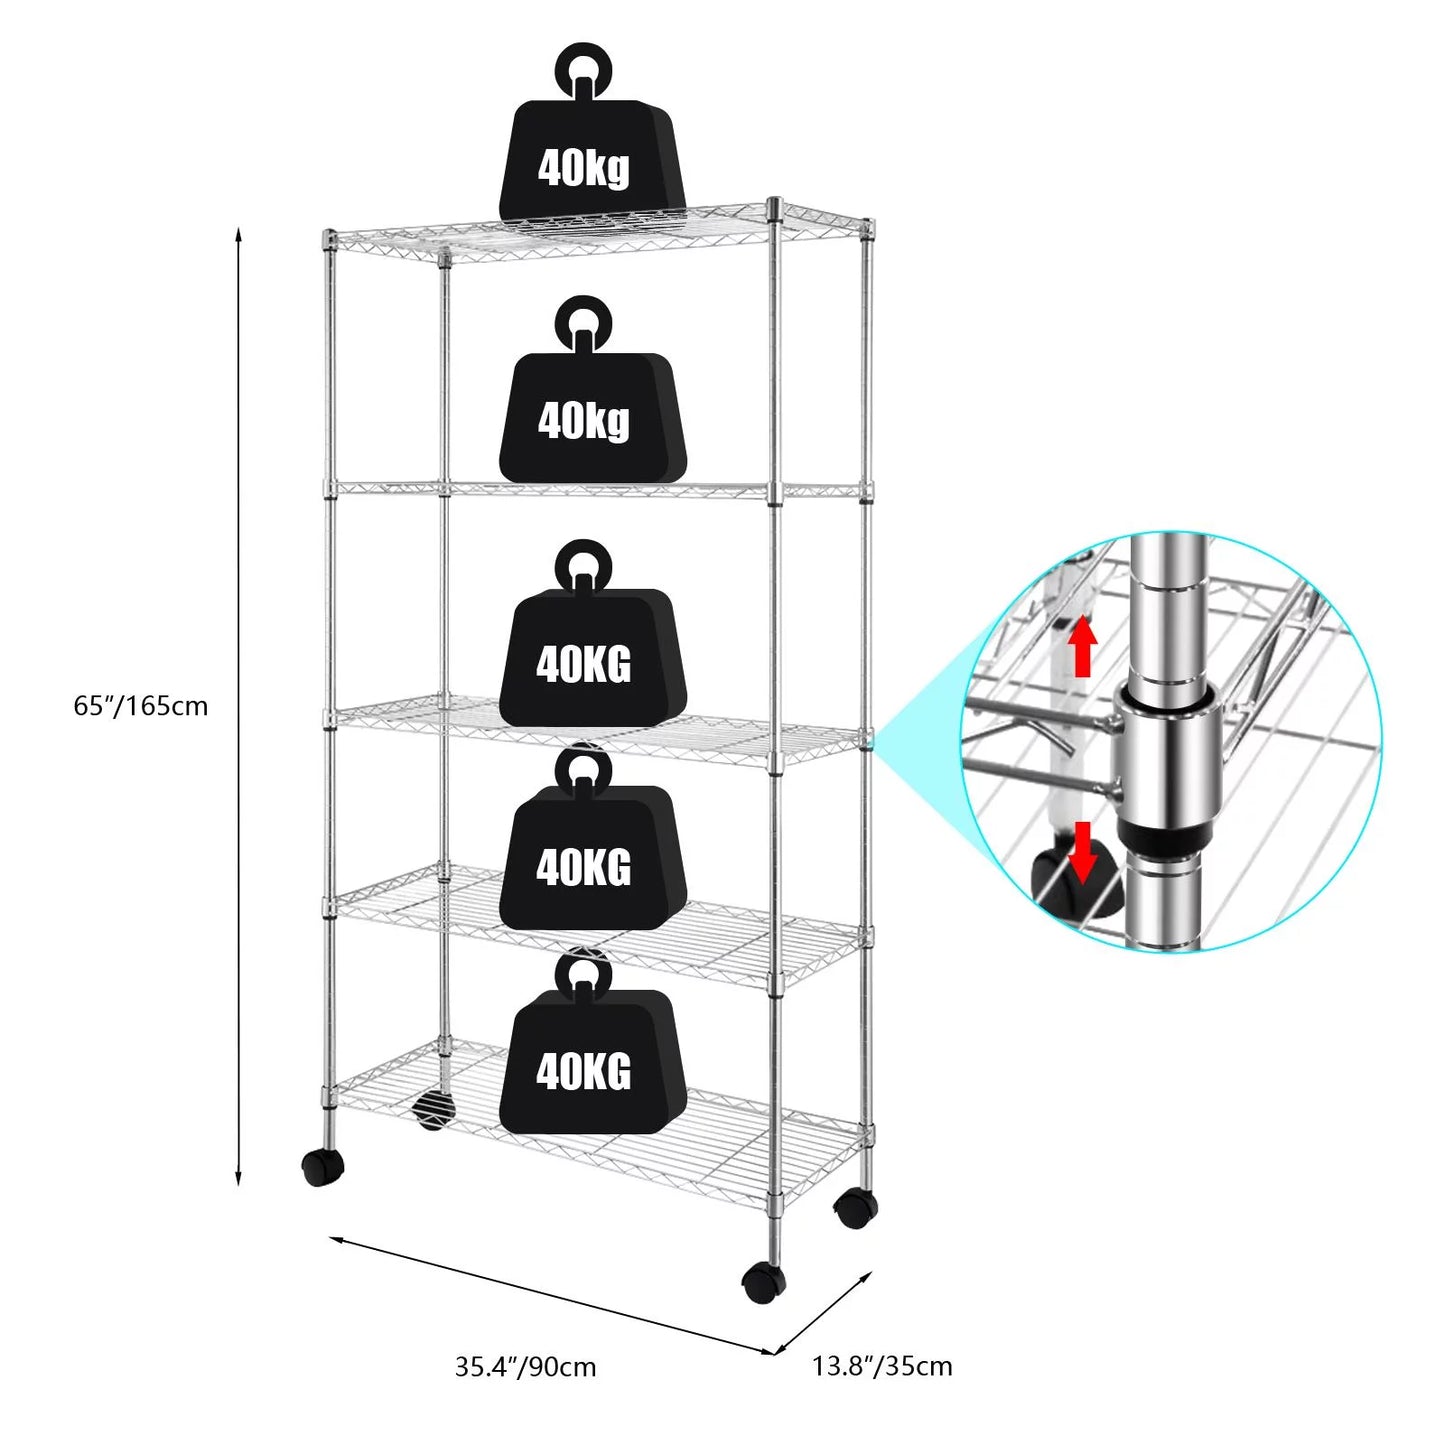 Zimtown 5-Shelf Storage Rack, 35"L x 14"W x 65" H Wire Shelving Unit with Wheels Black for Kitchen Garage, Capacity for 440 lbs